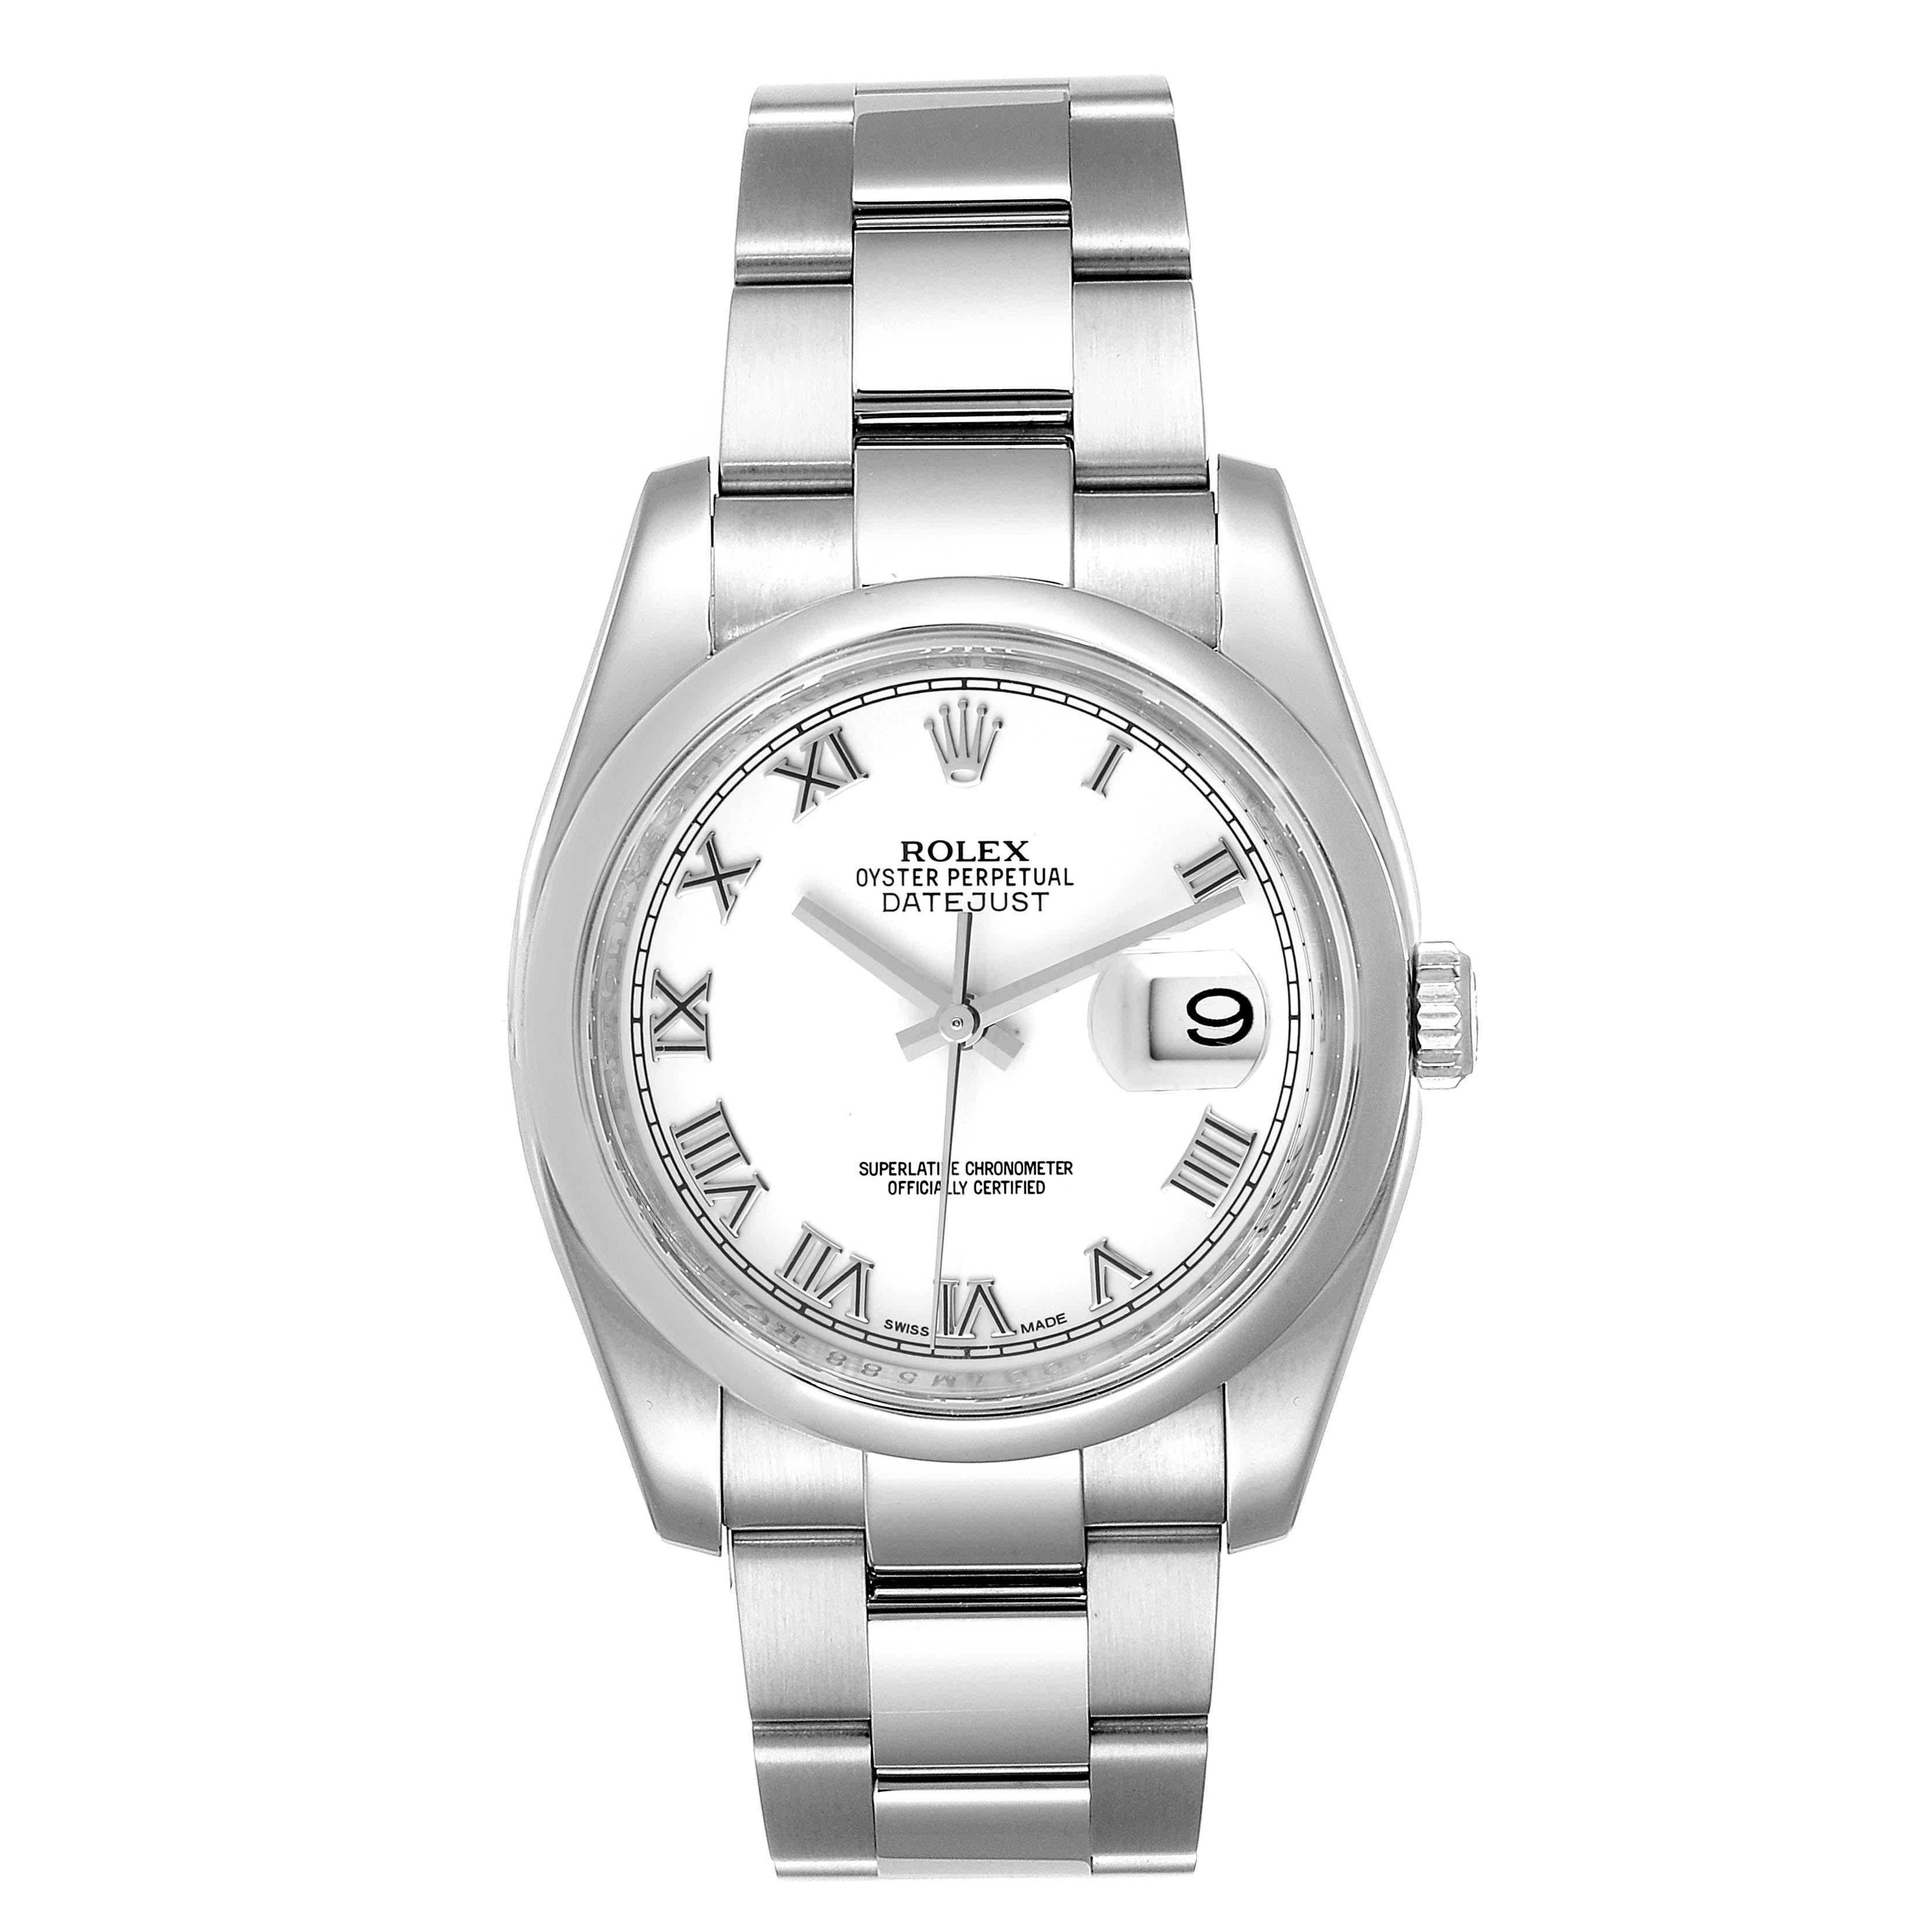 Rolex Datejust 36 White Roman Dial Steel Mens Watch 116200. Officially certified chronometer self-winding movement. Stainless steel case 36.0 mm in diameter. Rolex logo on a crown. Stainless steel smooth domed bezel. Scratch resistant sapphire